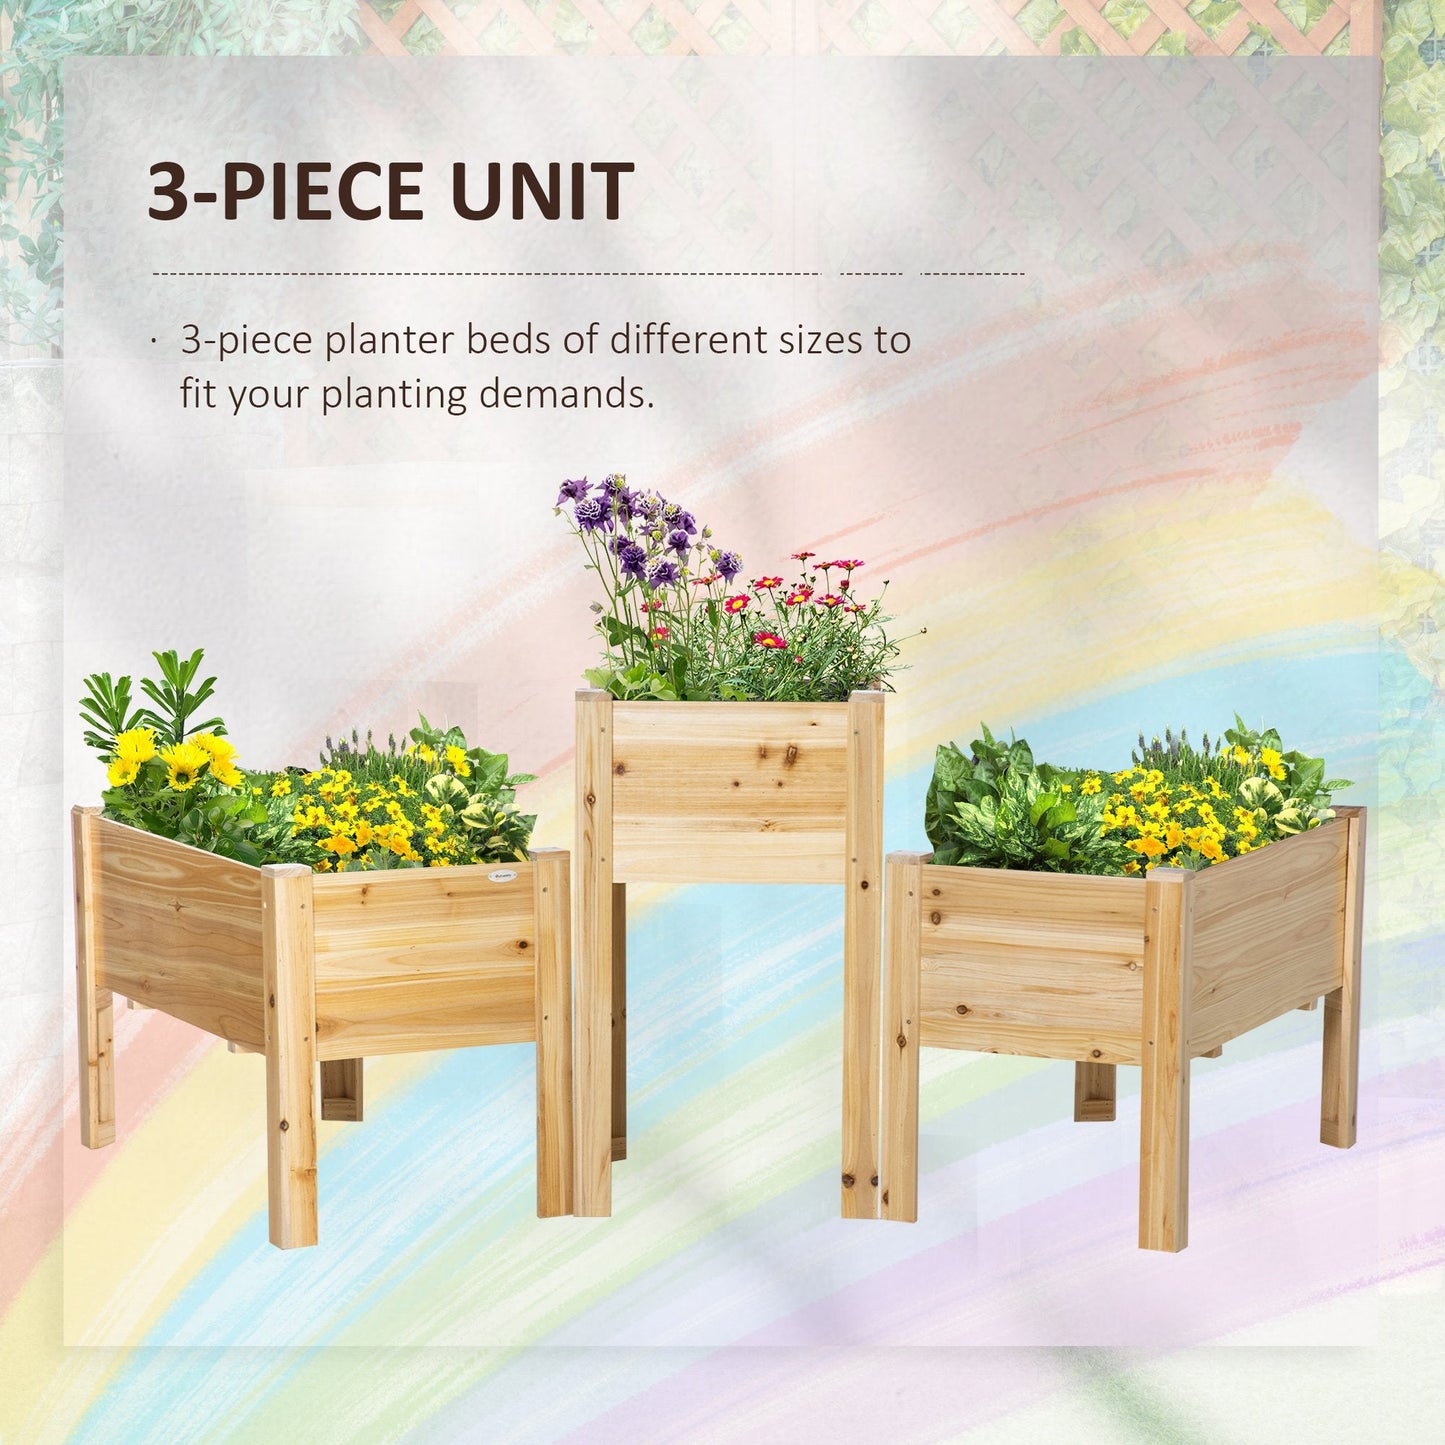 Outdoor and Garden-Raised Garden Bed Set of 3, Elevated Wood Planter Box with Legs and Bed Liner for Backyard and Patio to Grow Vegetables, Herbs, and Flowers - Outdoor Style Company